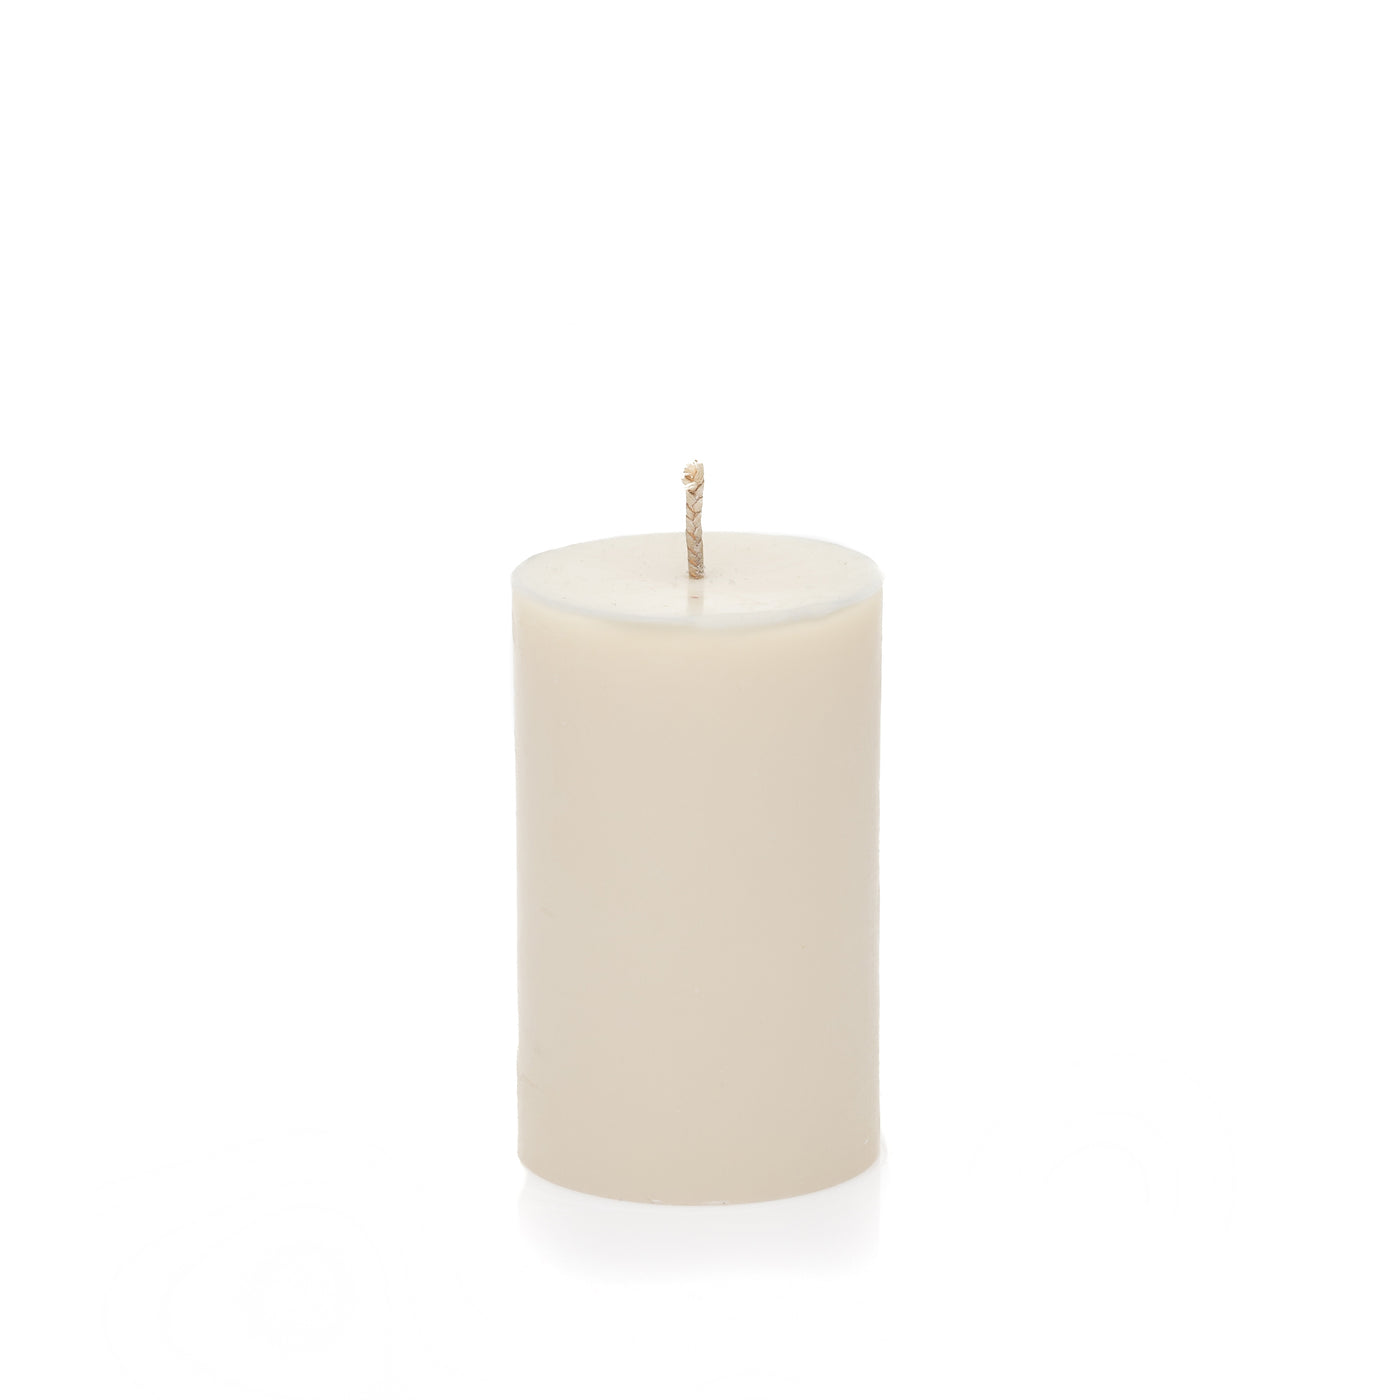 PIVOINE "Naked" scented candle